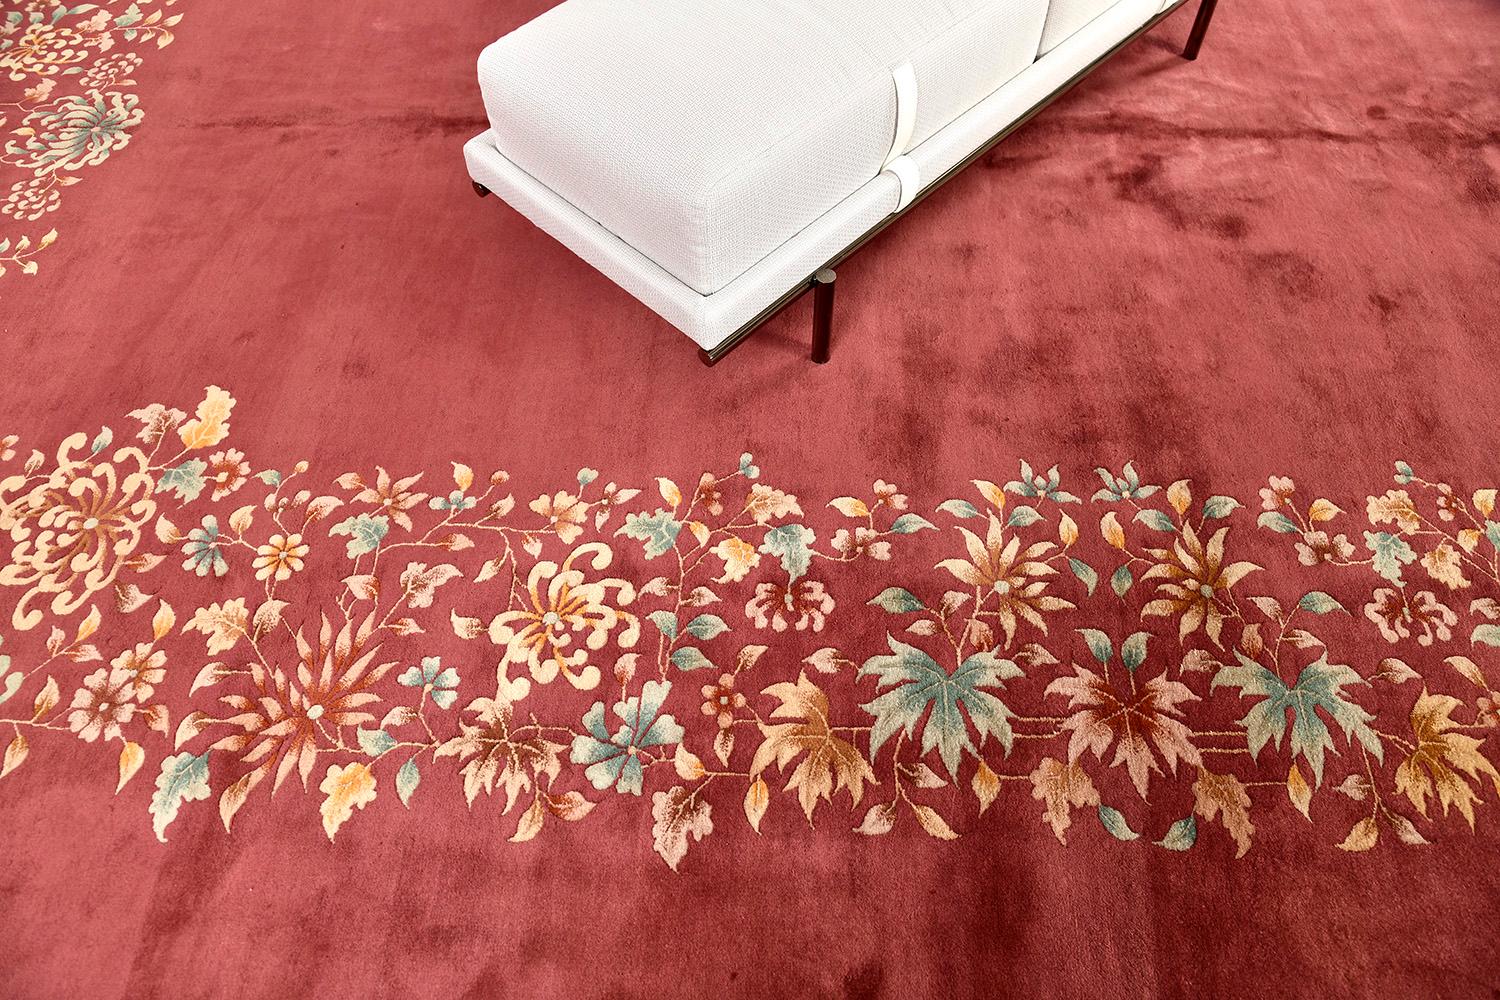 A vintage Nichol Chinese art deco rug that will leave lasting impressions and elevate any design space. The bold elegant blushing field and full bloom borders together with the traditional floral vines work to create a vibrant and fashionable